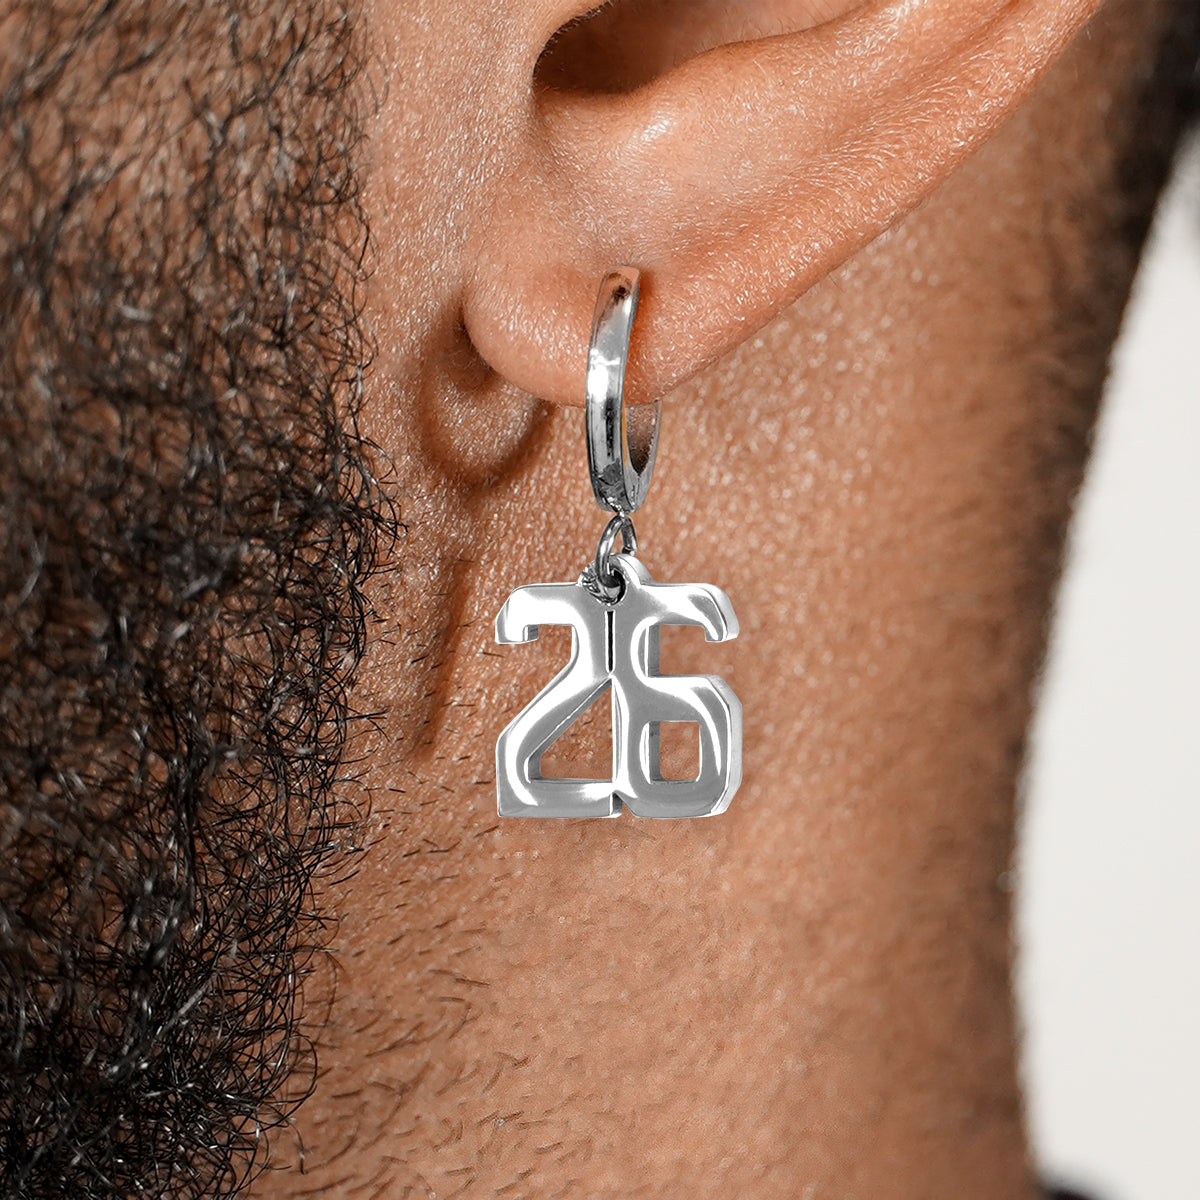 26 Number Earring - Stainless Steel